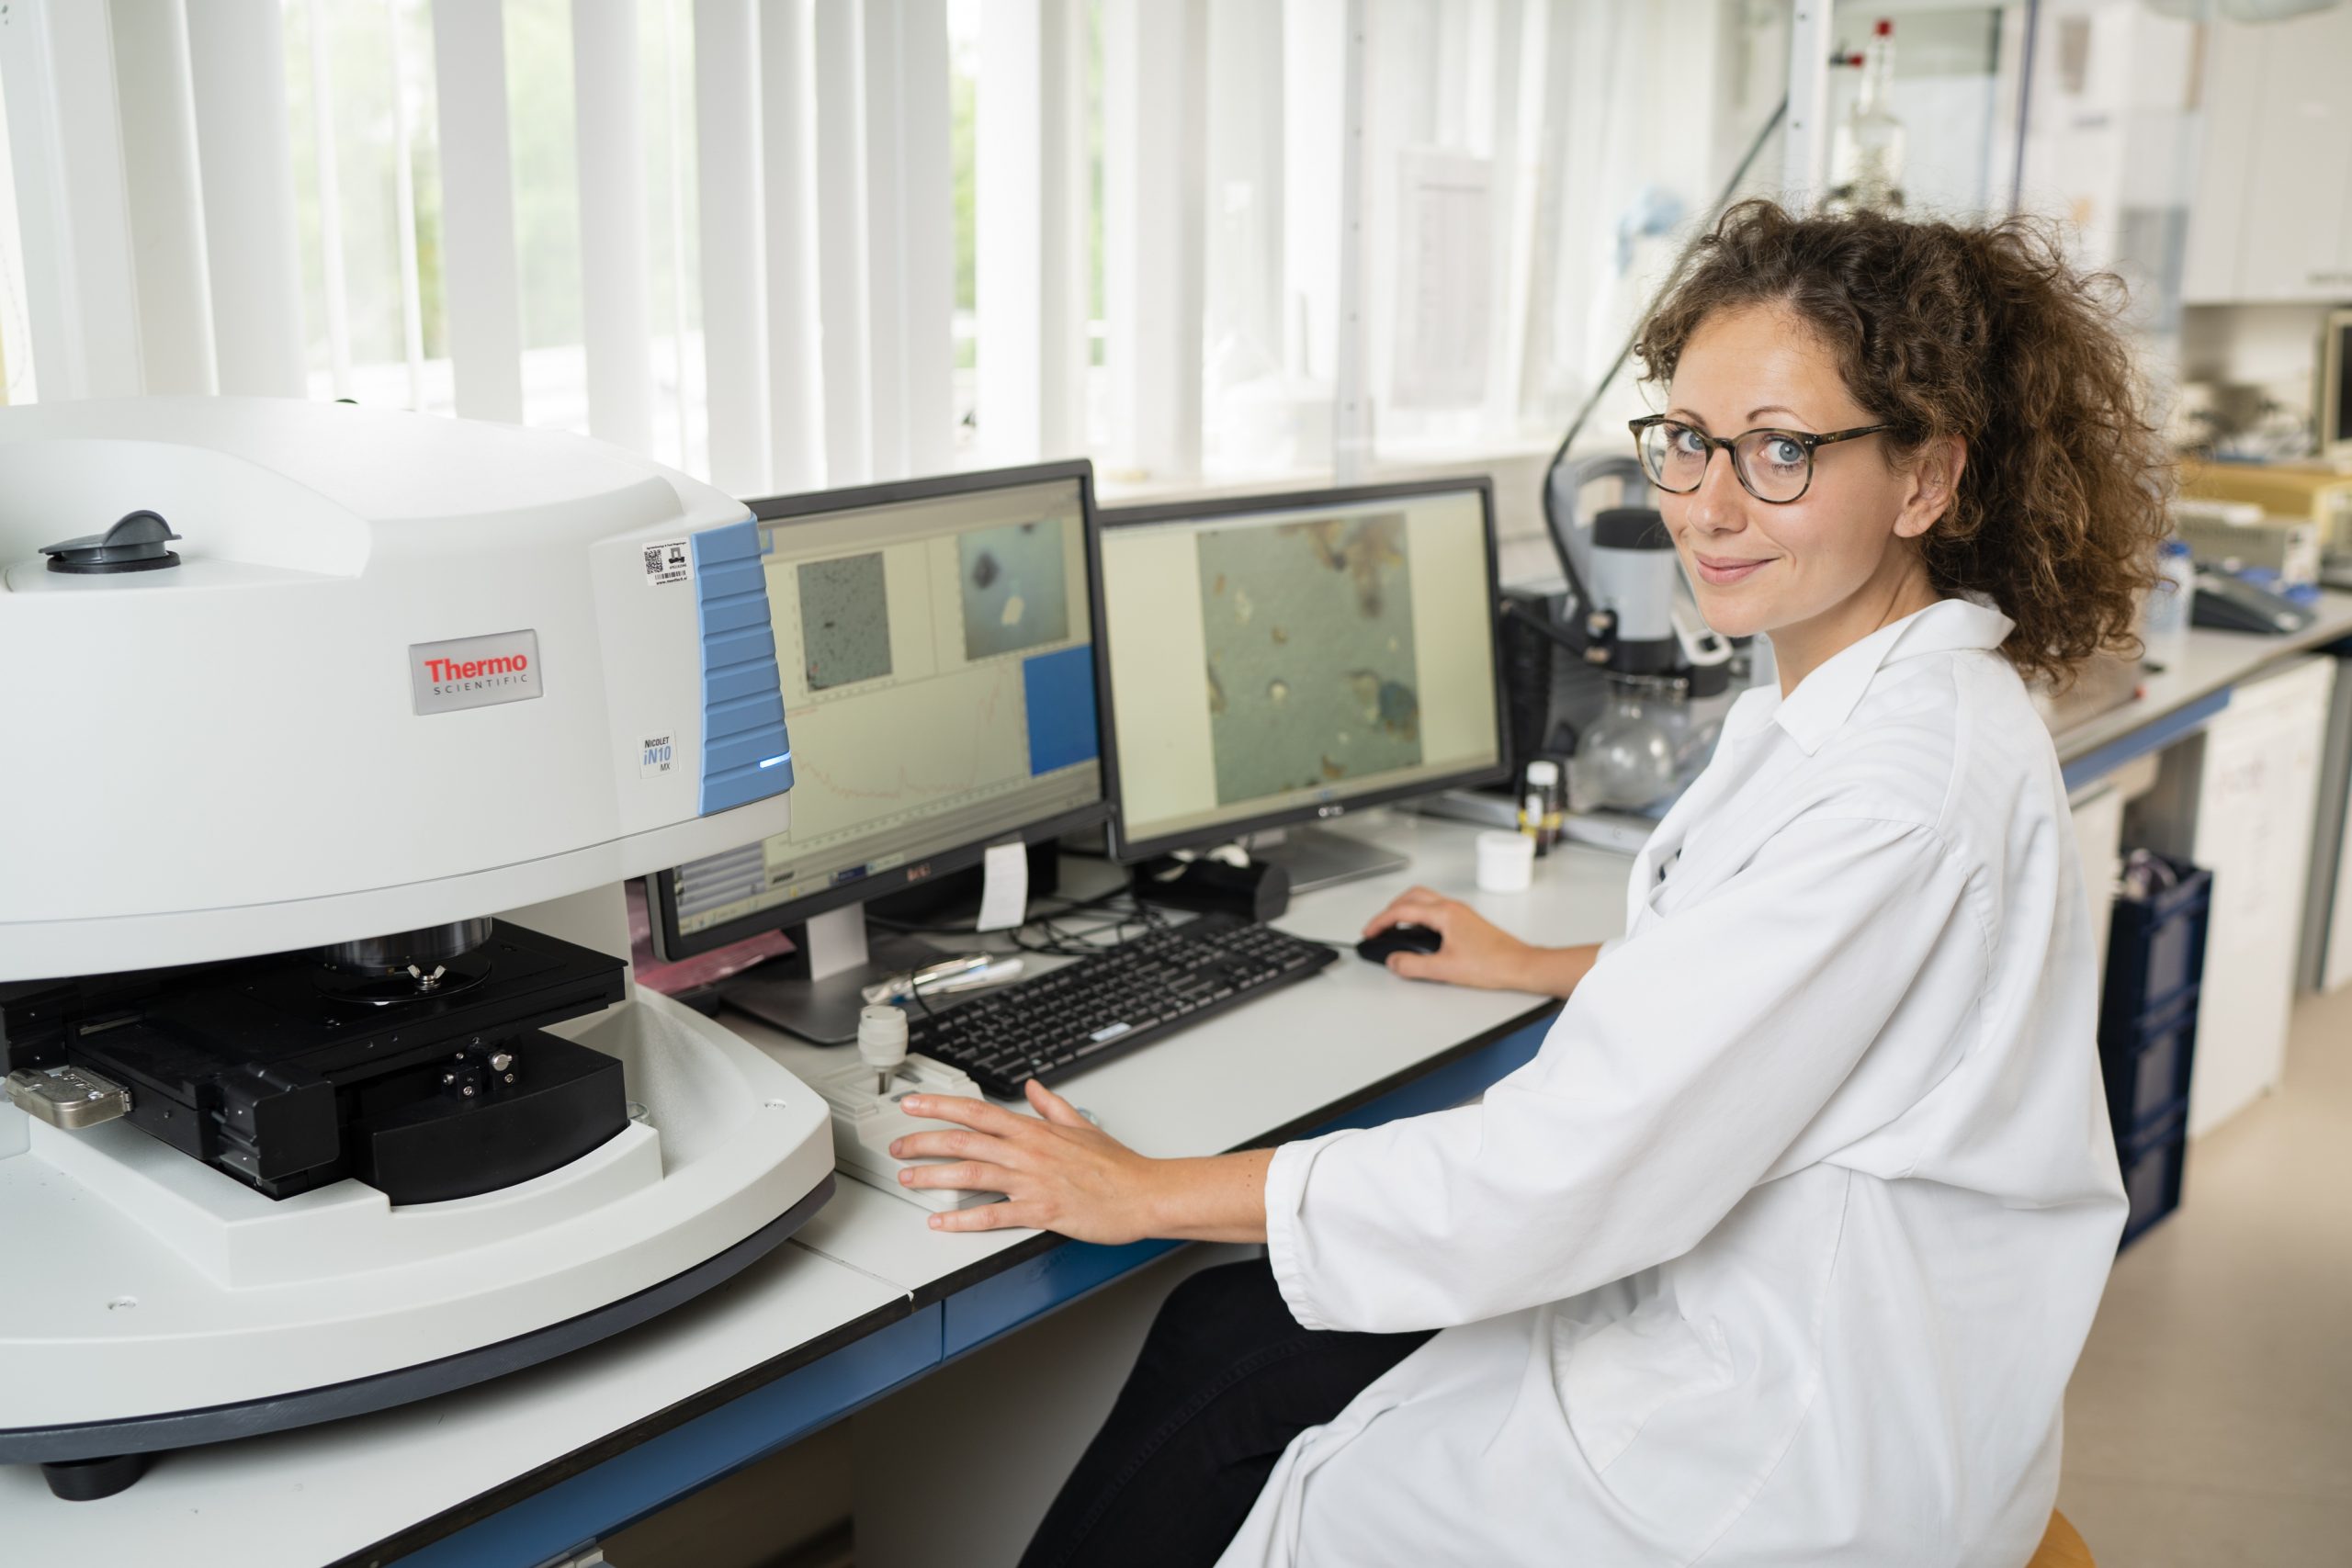 Svenja Mintenig studied the analytical requirements for the identification of micro- and nanoplastics.